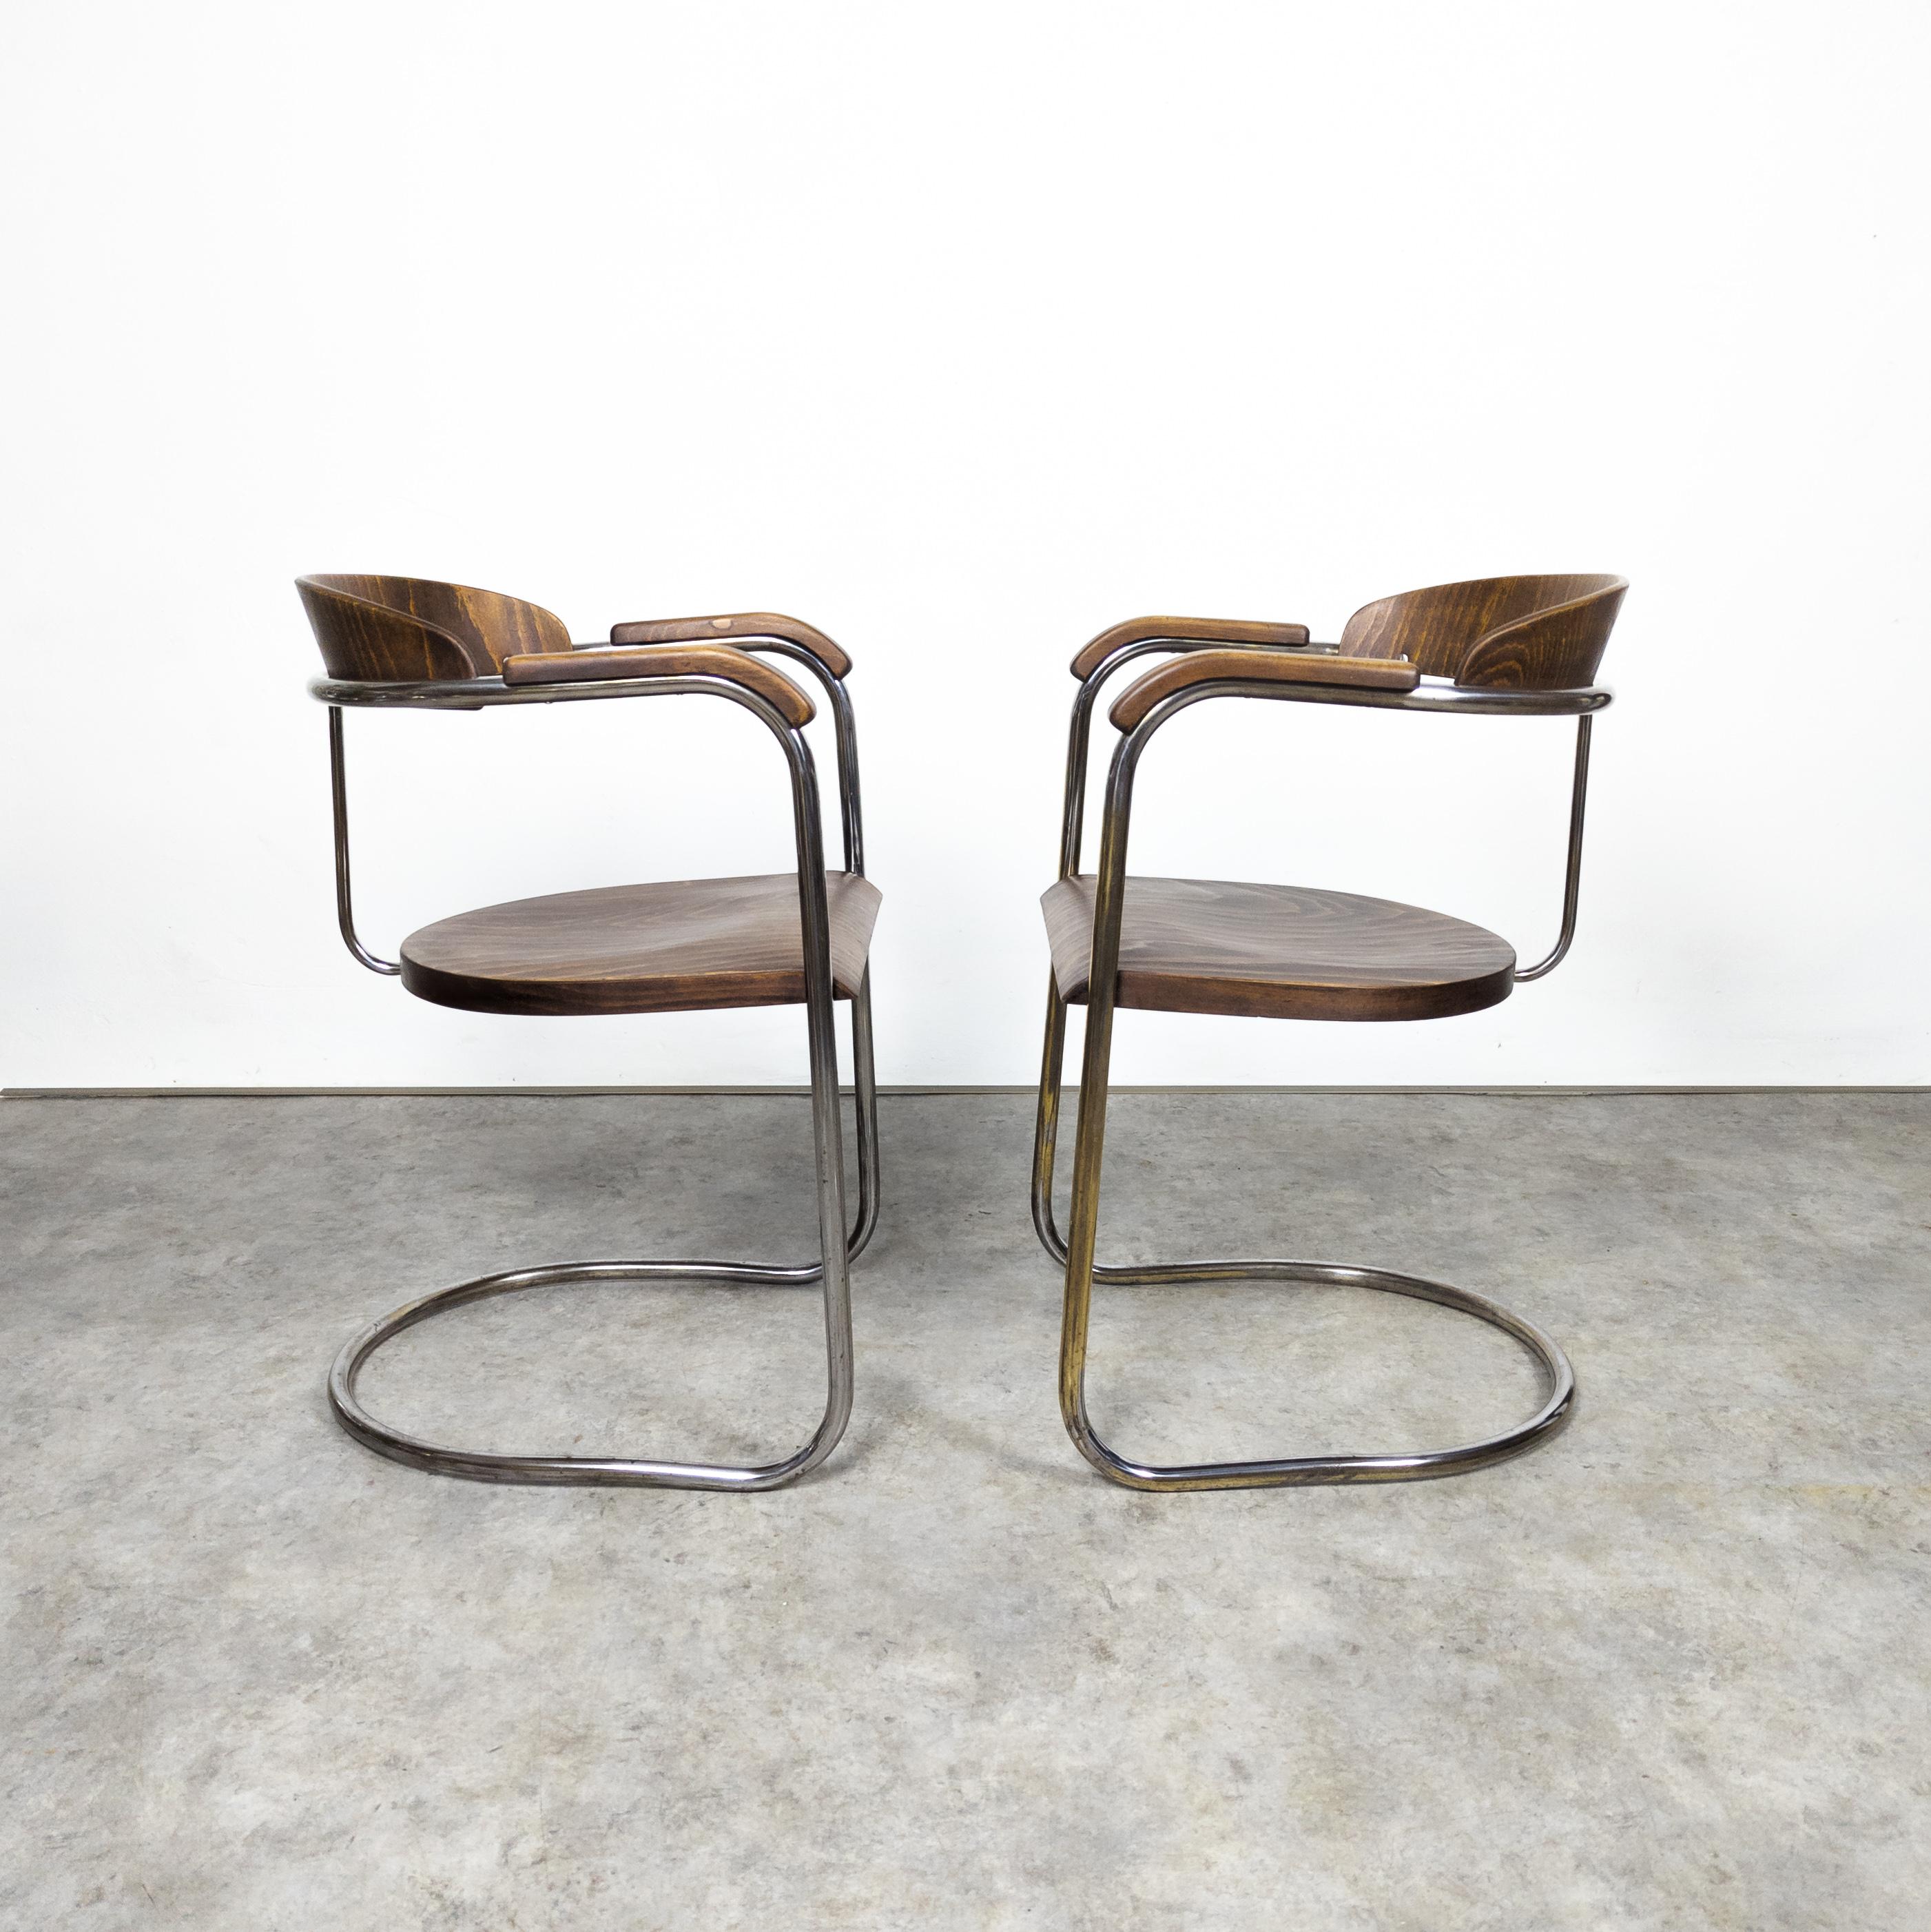 Steel Rare Hans and Wassily Luckhardt SS 33 armchairs variant  For Sale